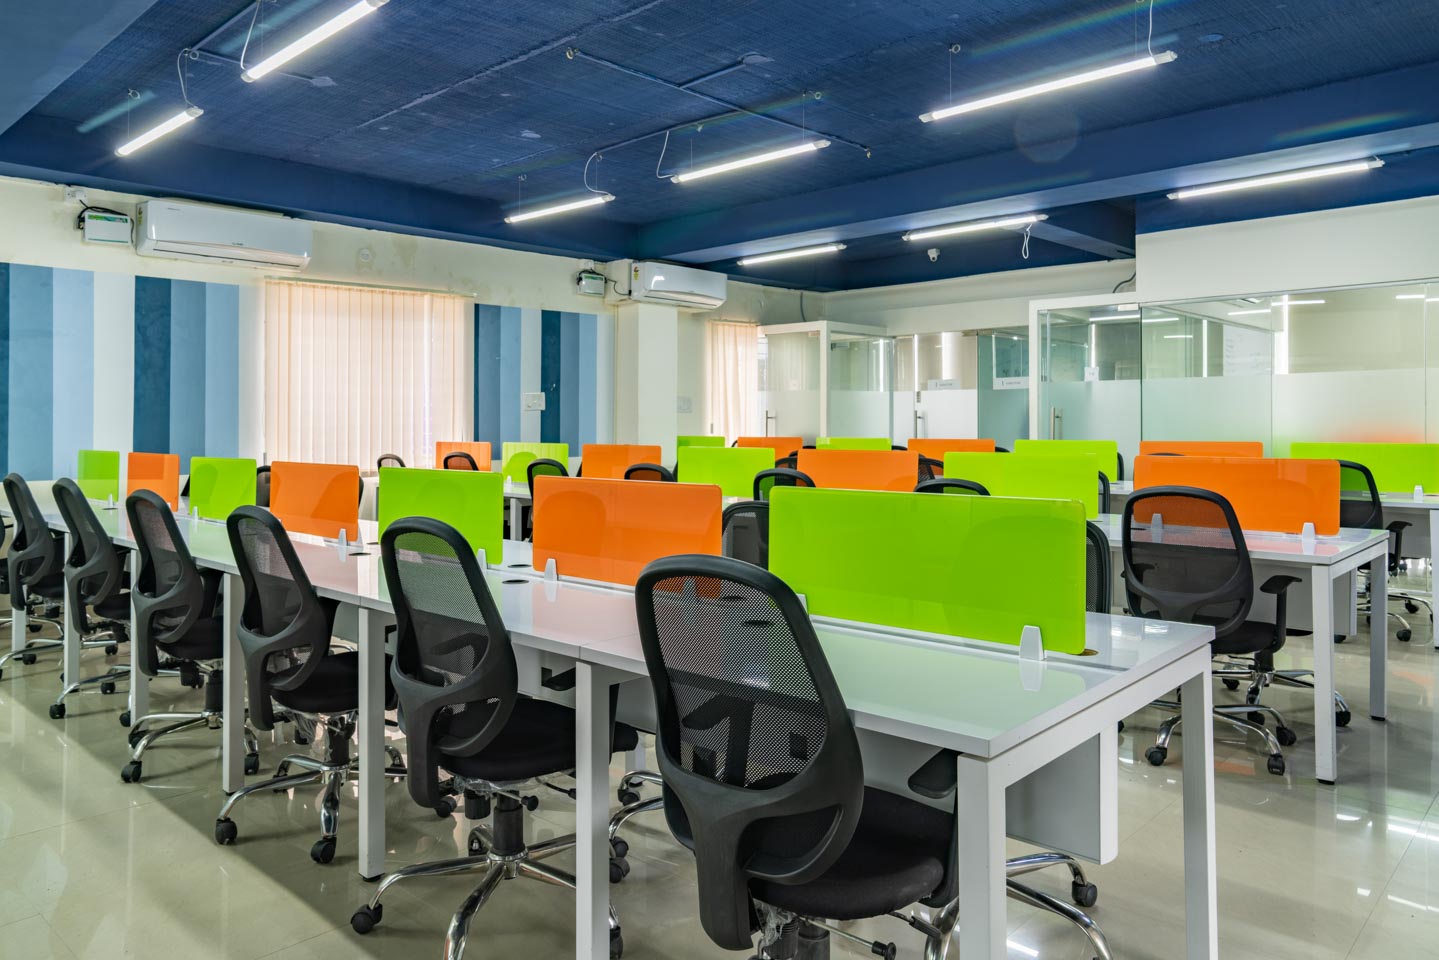 Startuphuts HSR Layout - Coworking Space and Shared Office Space in HSR ...